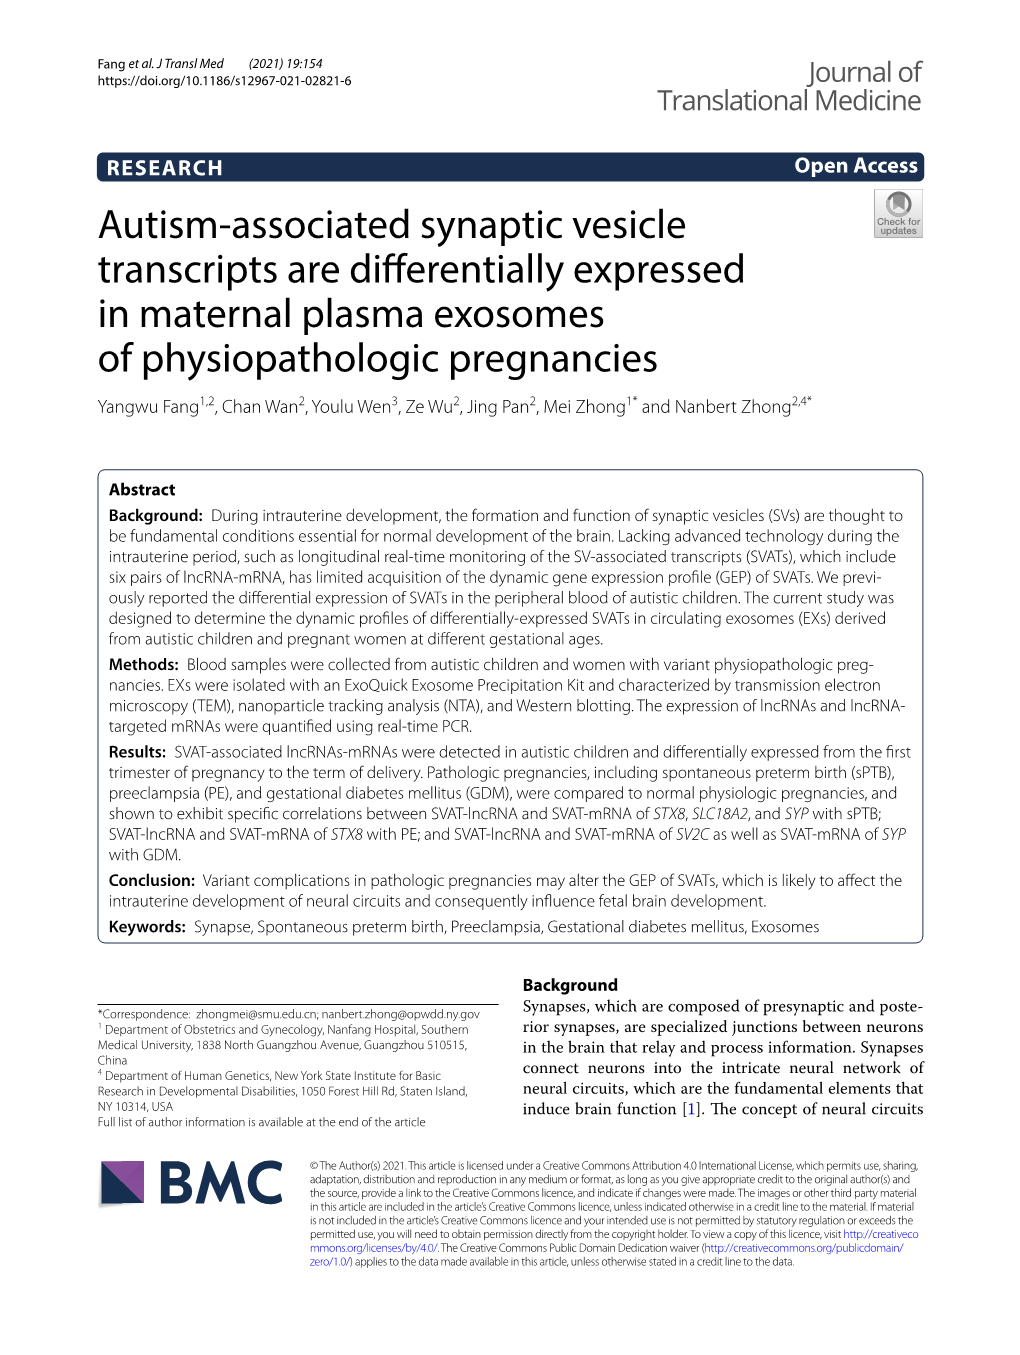 Autism-Associated Synaptic Vesicle Transcripts Are Differentially